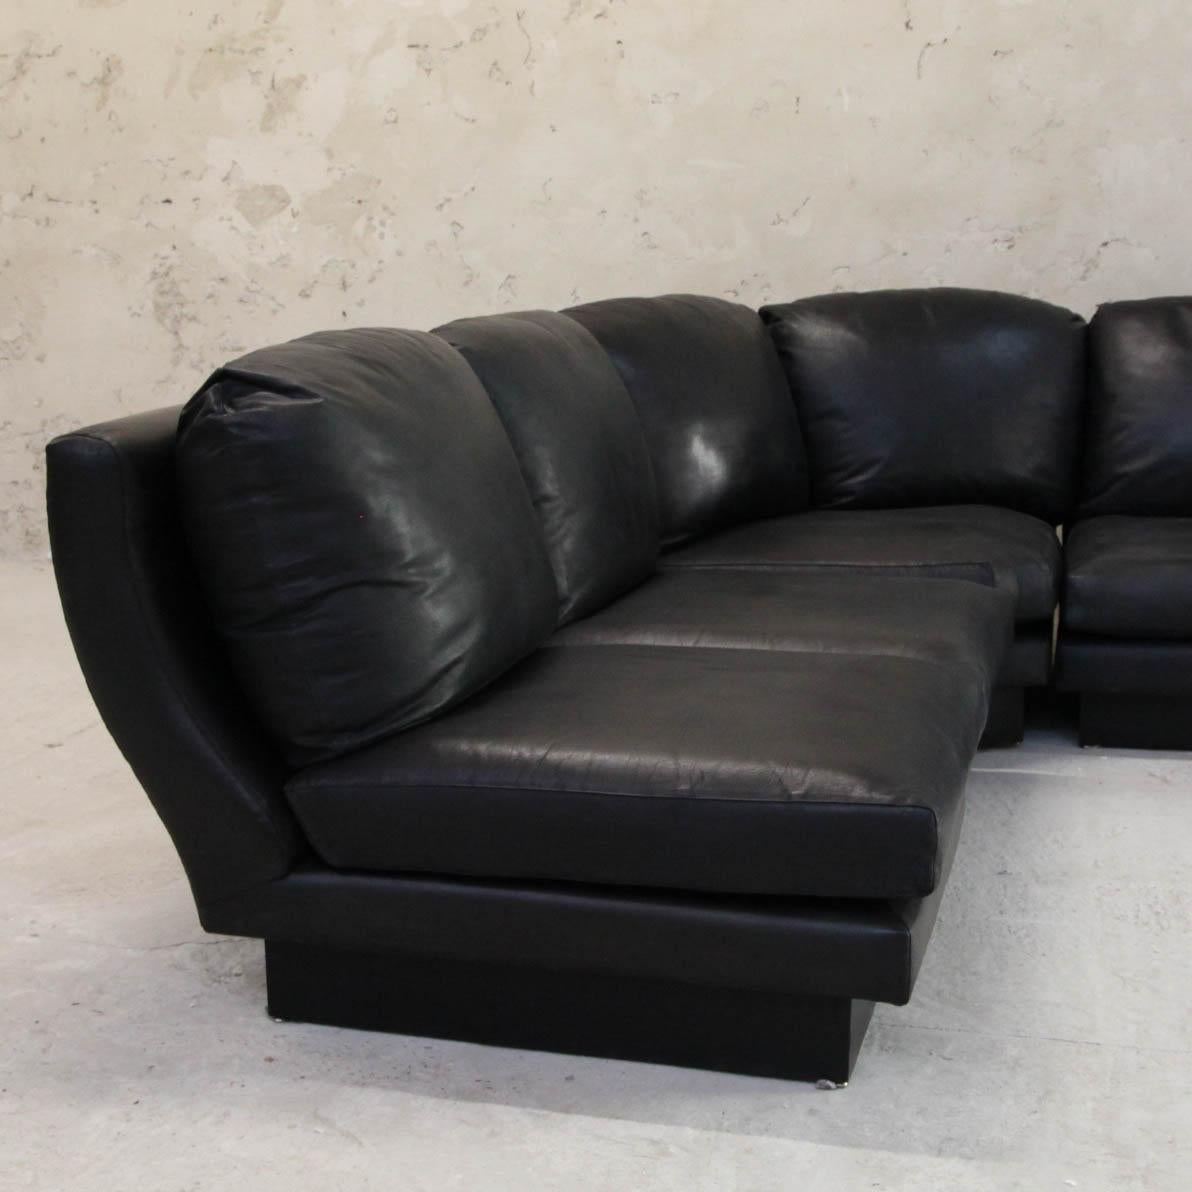 Rare Vintage Sofa in Black Leather and Laminated Signed Willy Rizzo 1